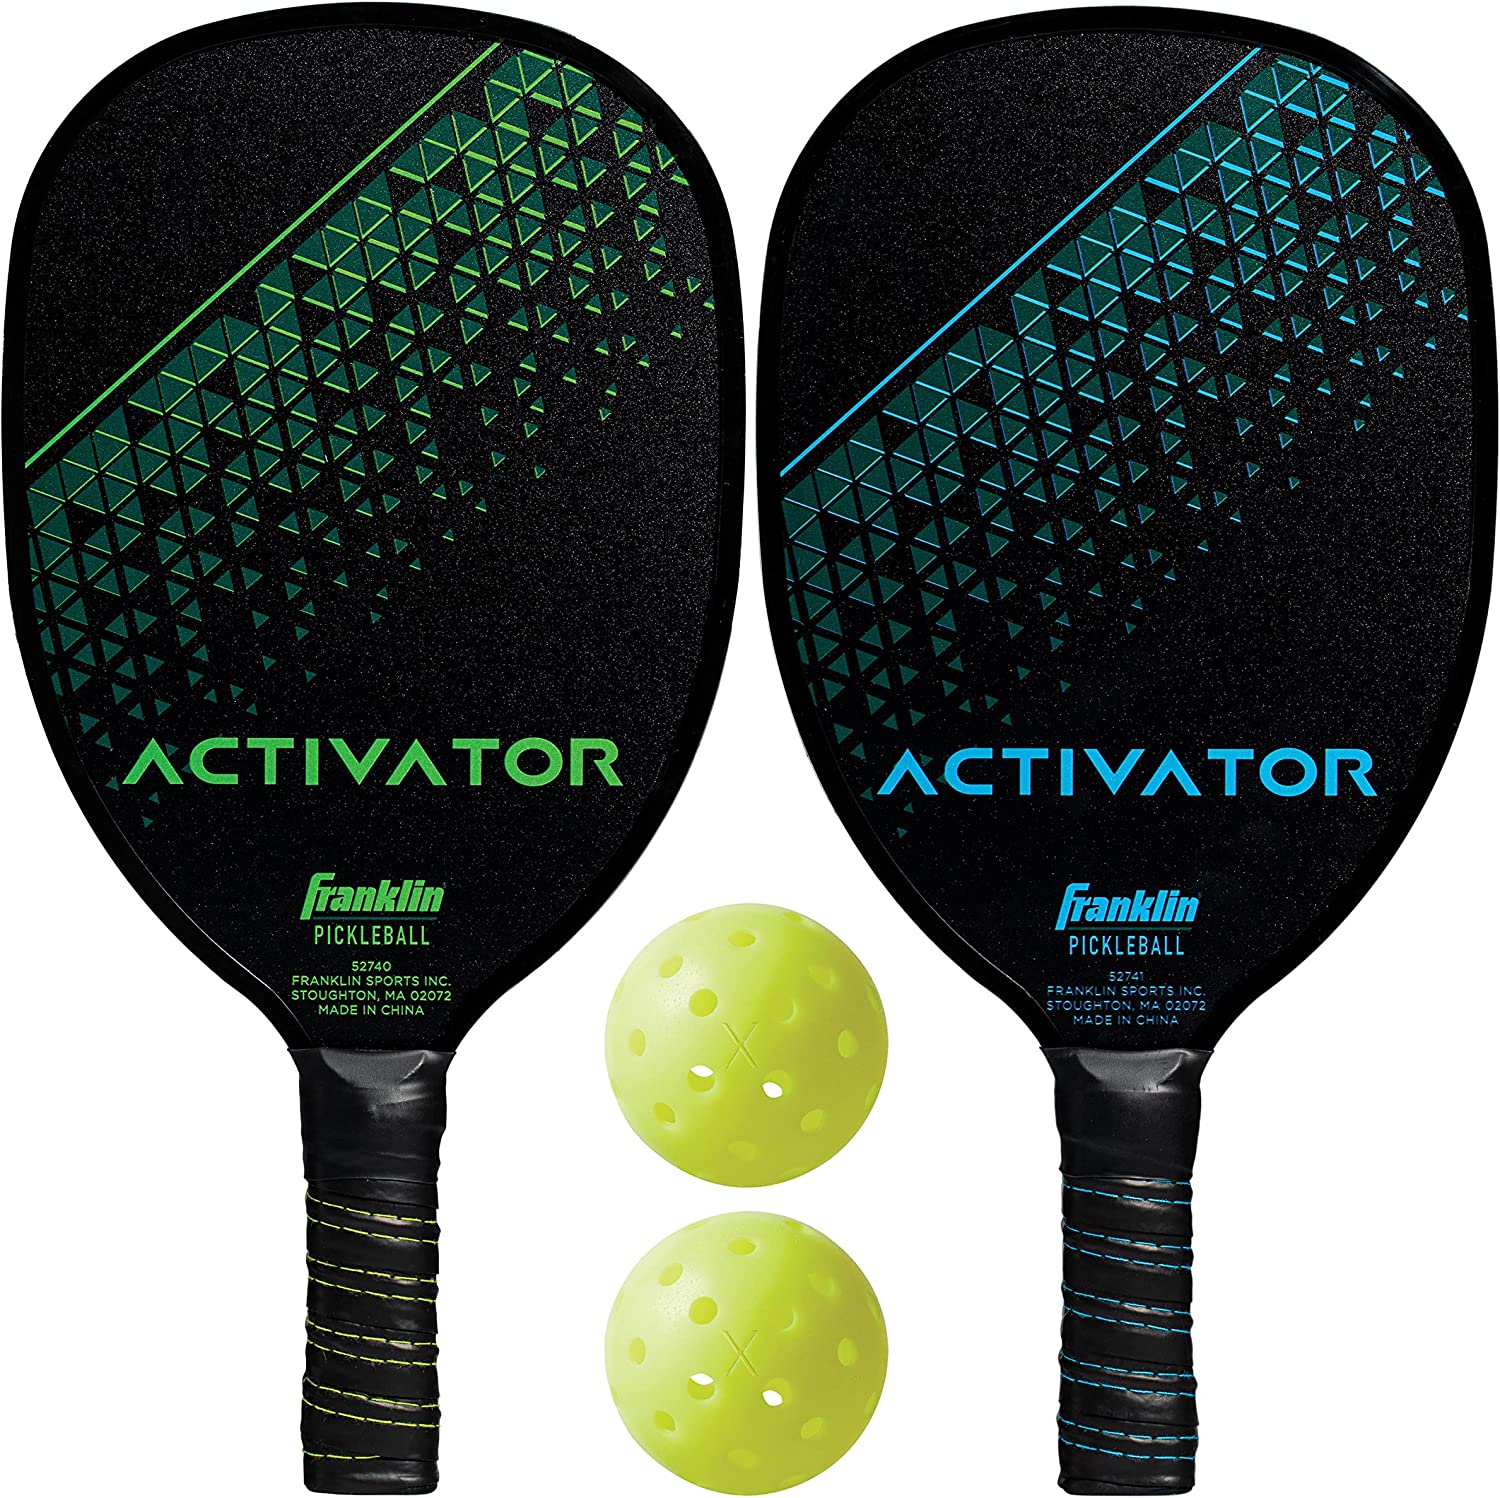 Franklin Sports Pickleball Paddle and Ball Set - Wooden Pickleball Rackets + Pickleballs - Activator - USA Pickleball (USAPA) Approved $15.29